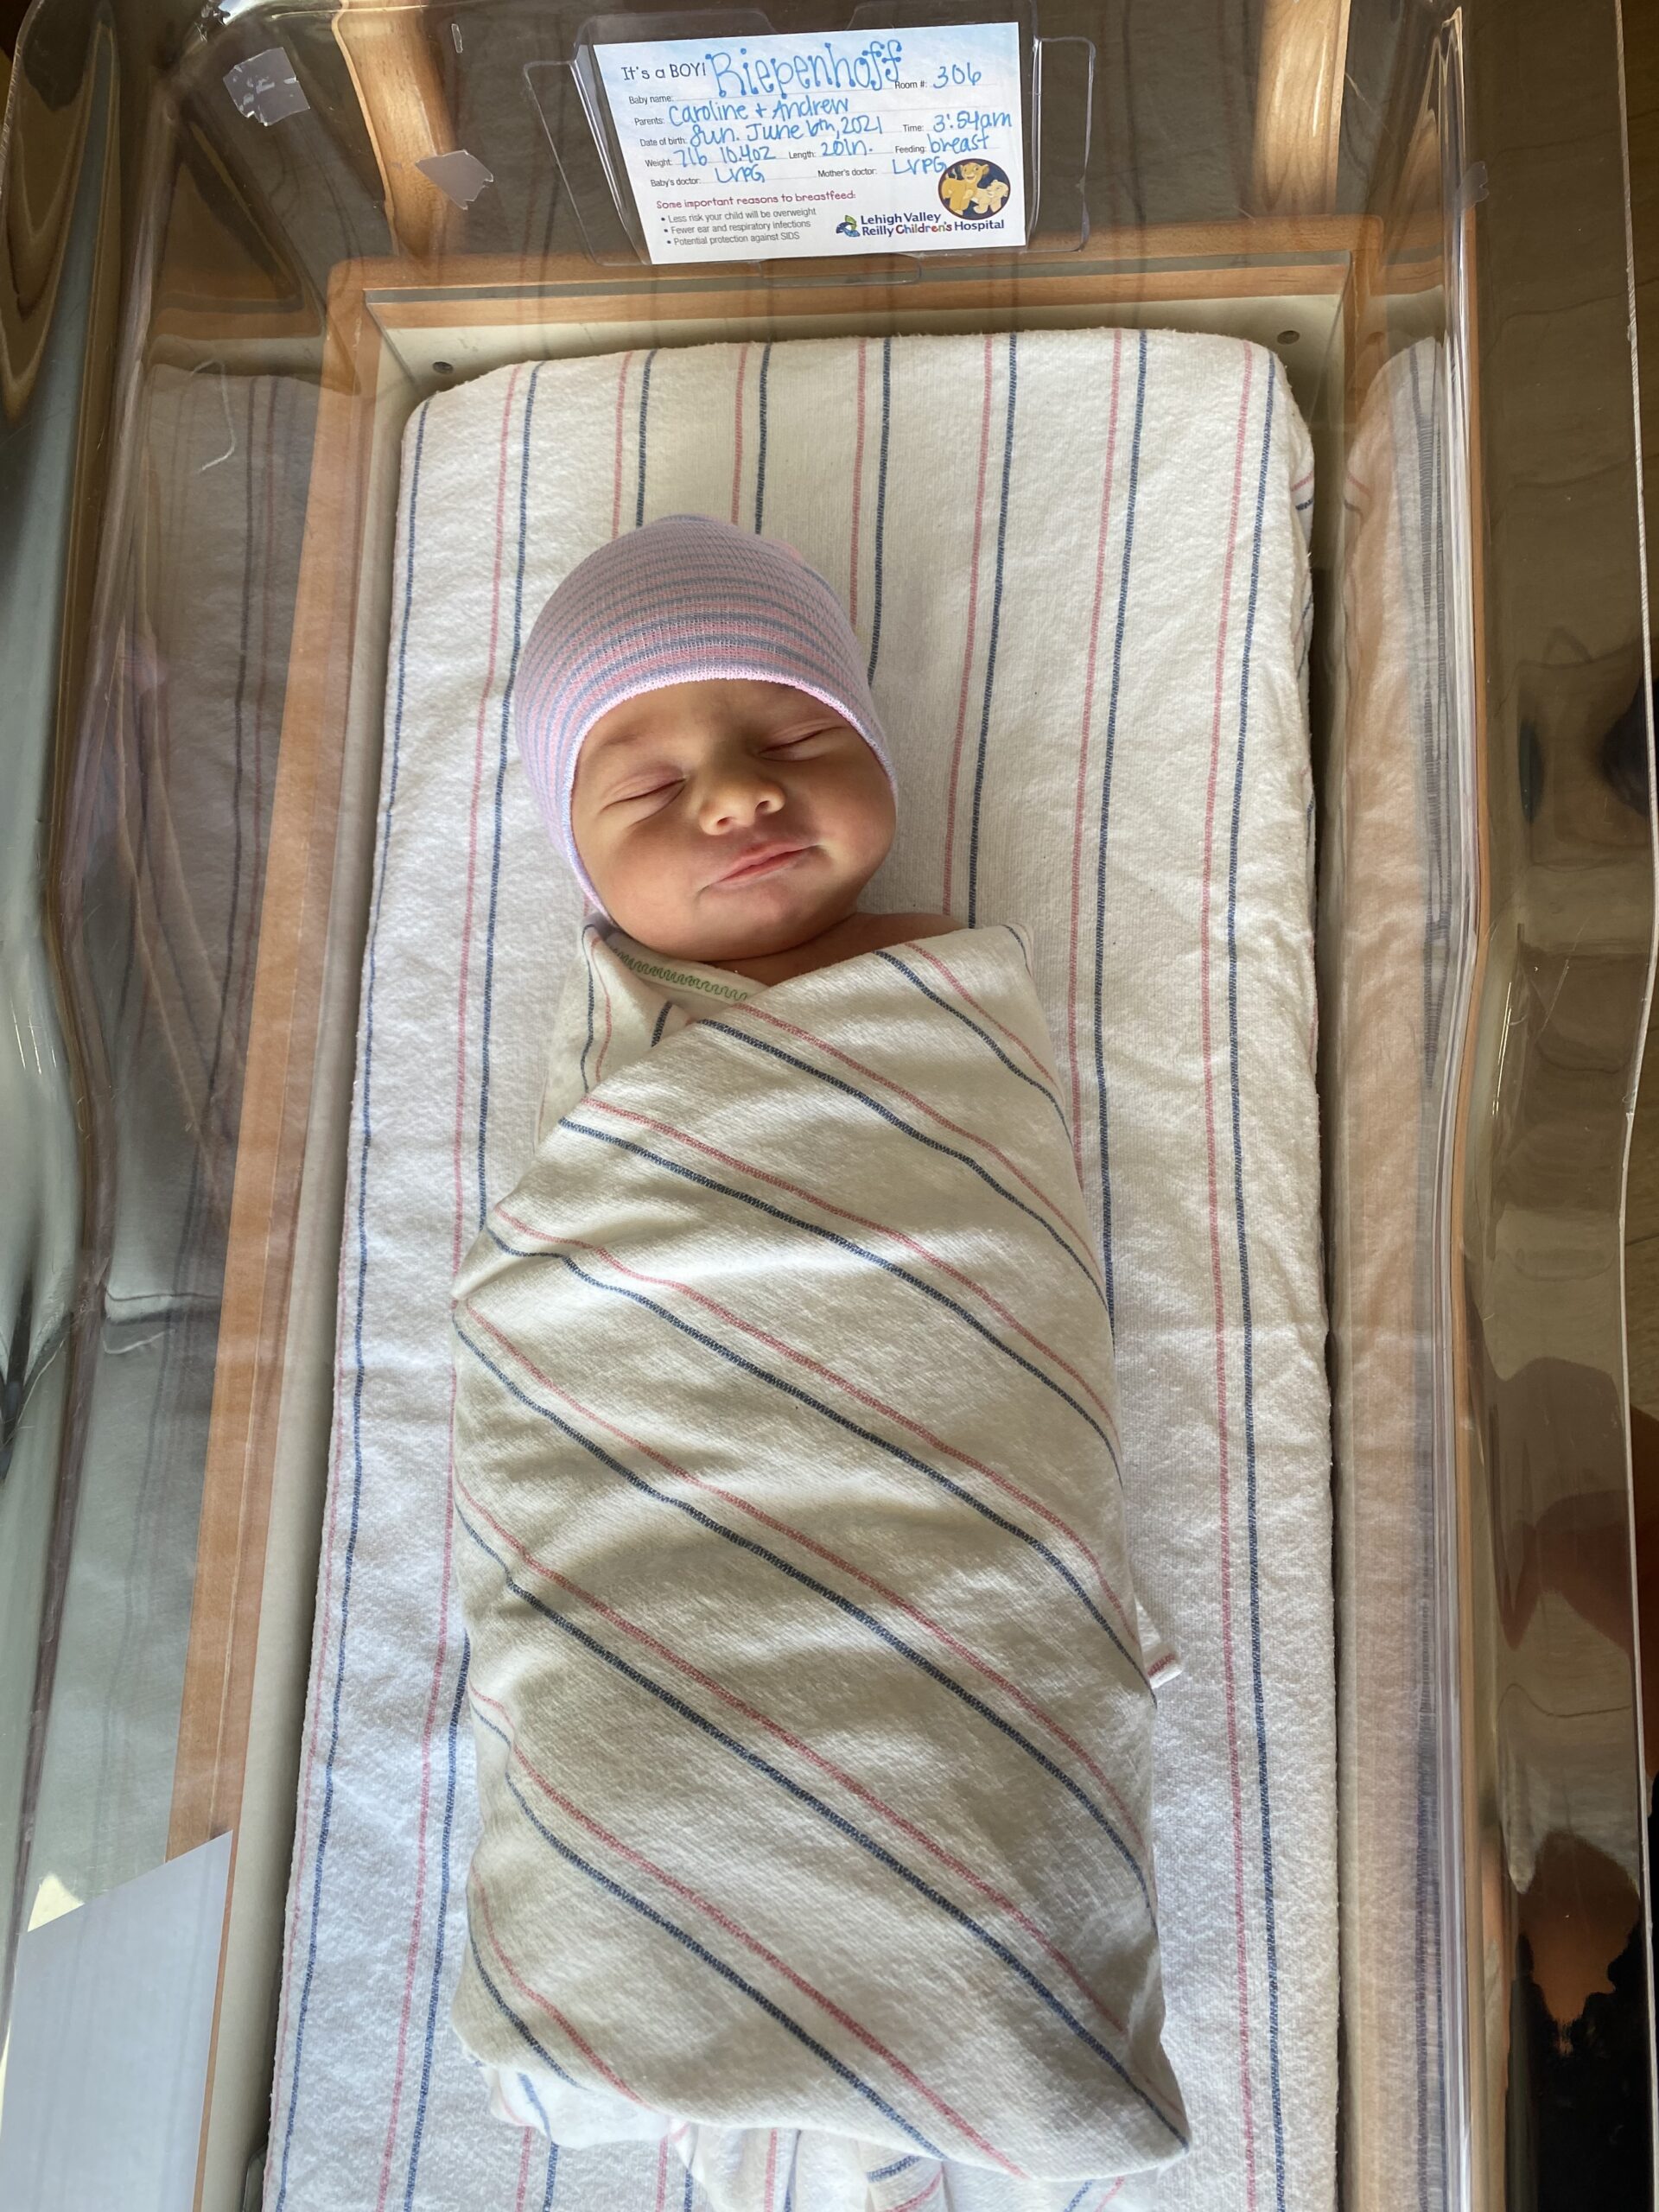 Baby Jay Riepenhoff Foster wrapped in a blanket in his hospital crib shortly after birth